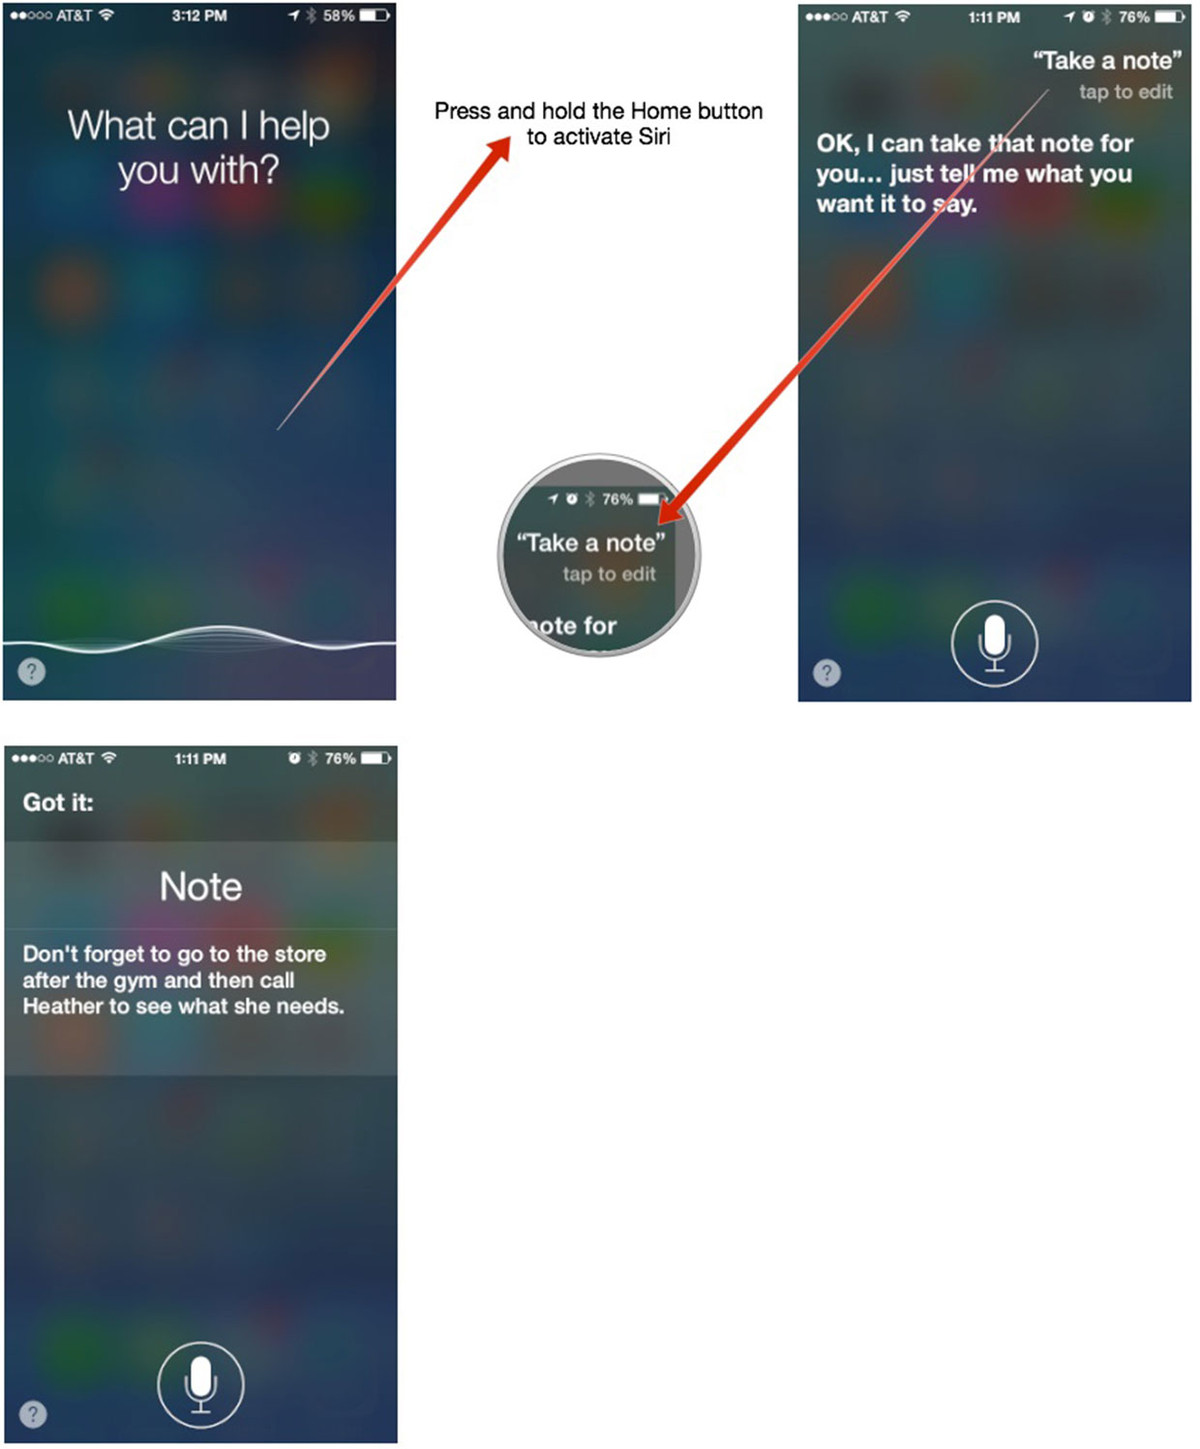 How to Dictate Siri to take a note on your iPhone or iPad